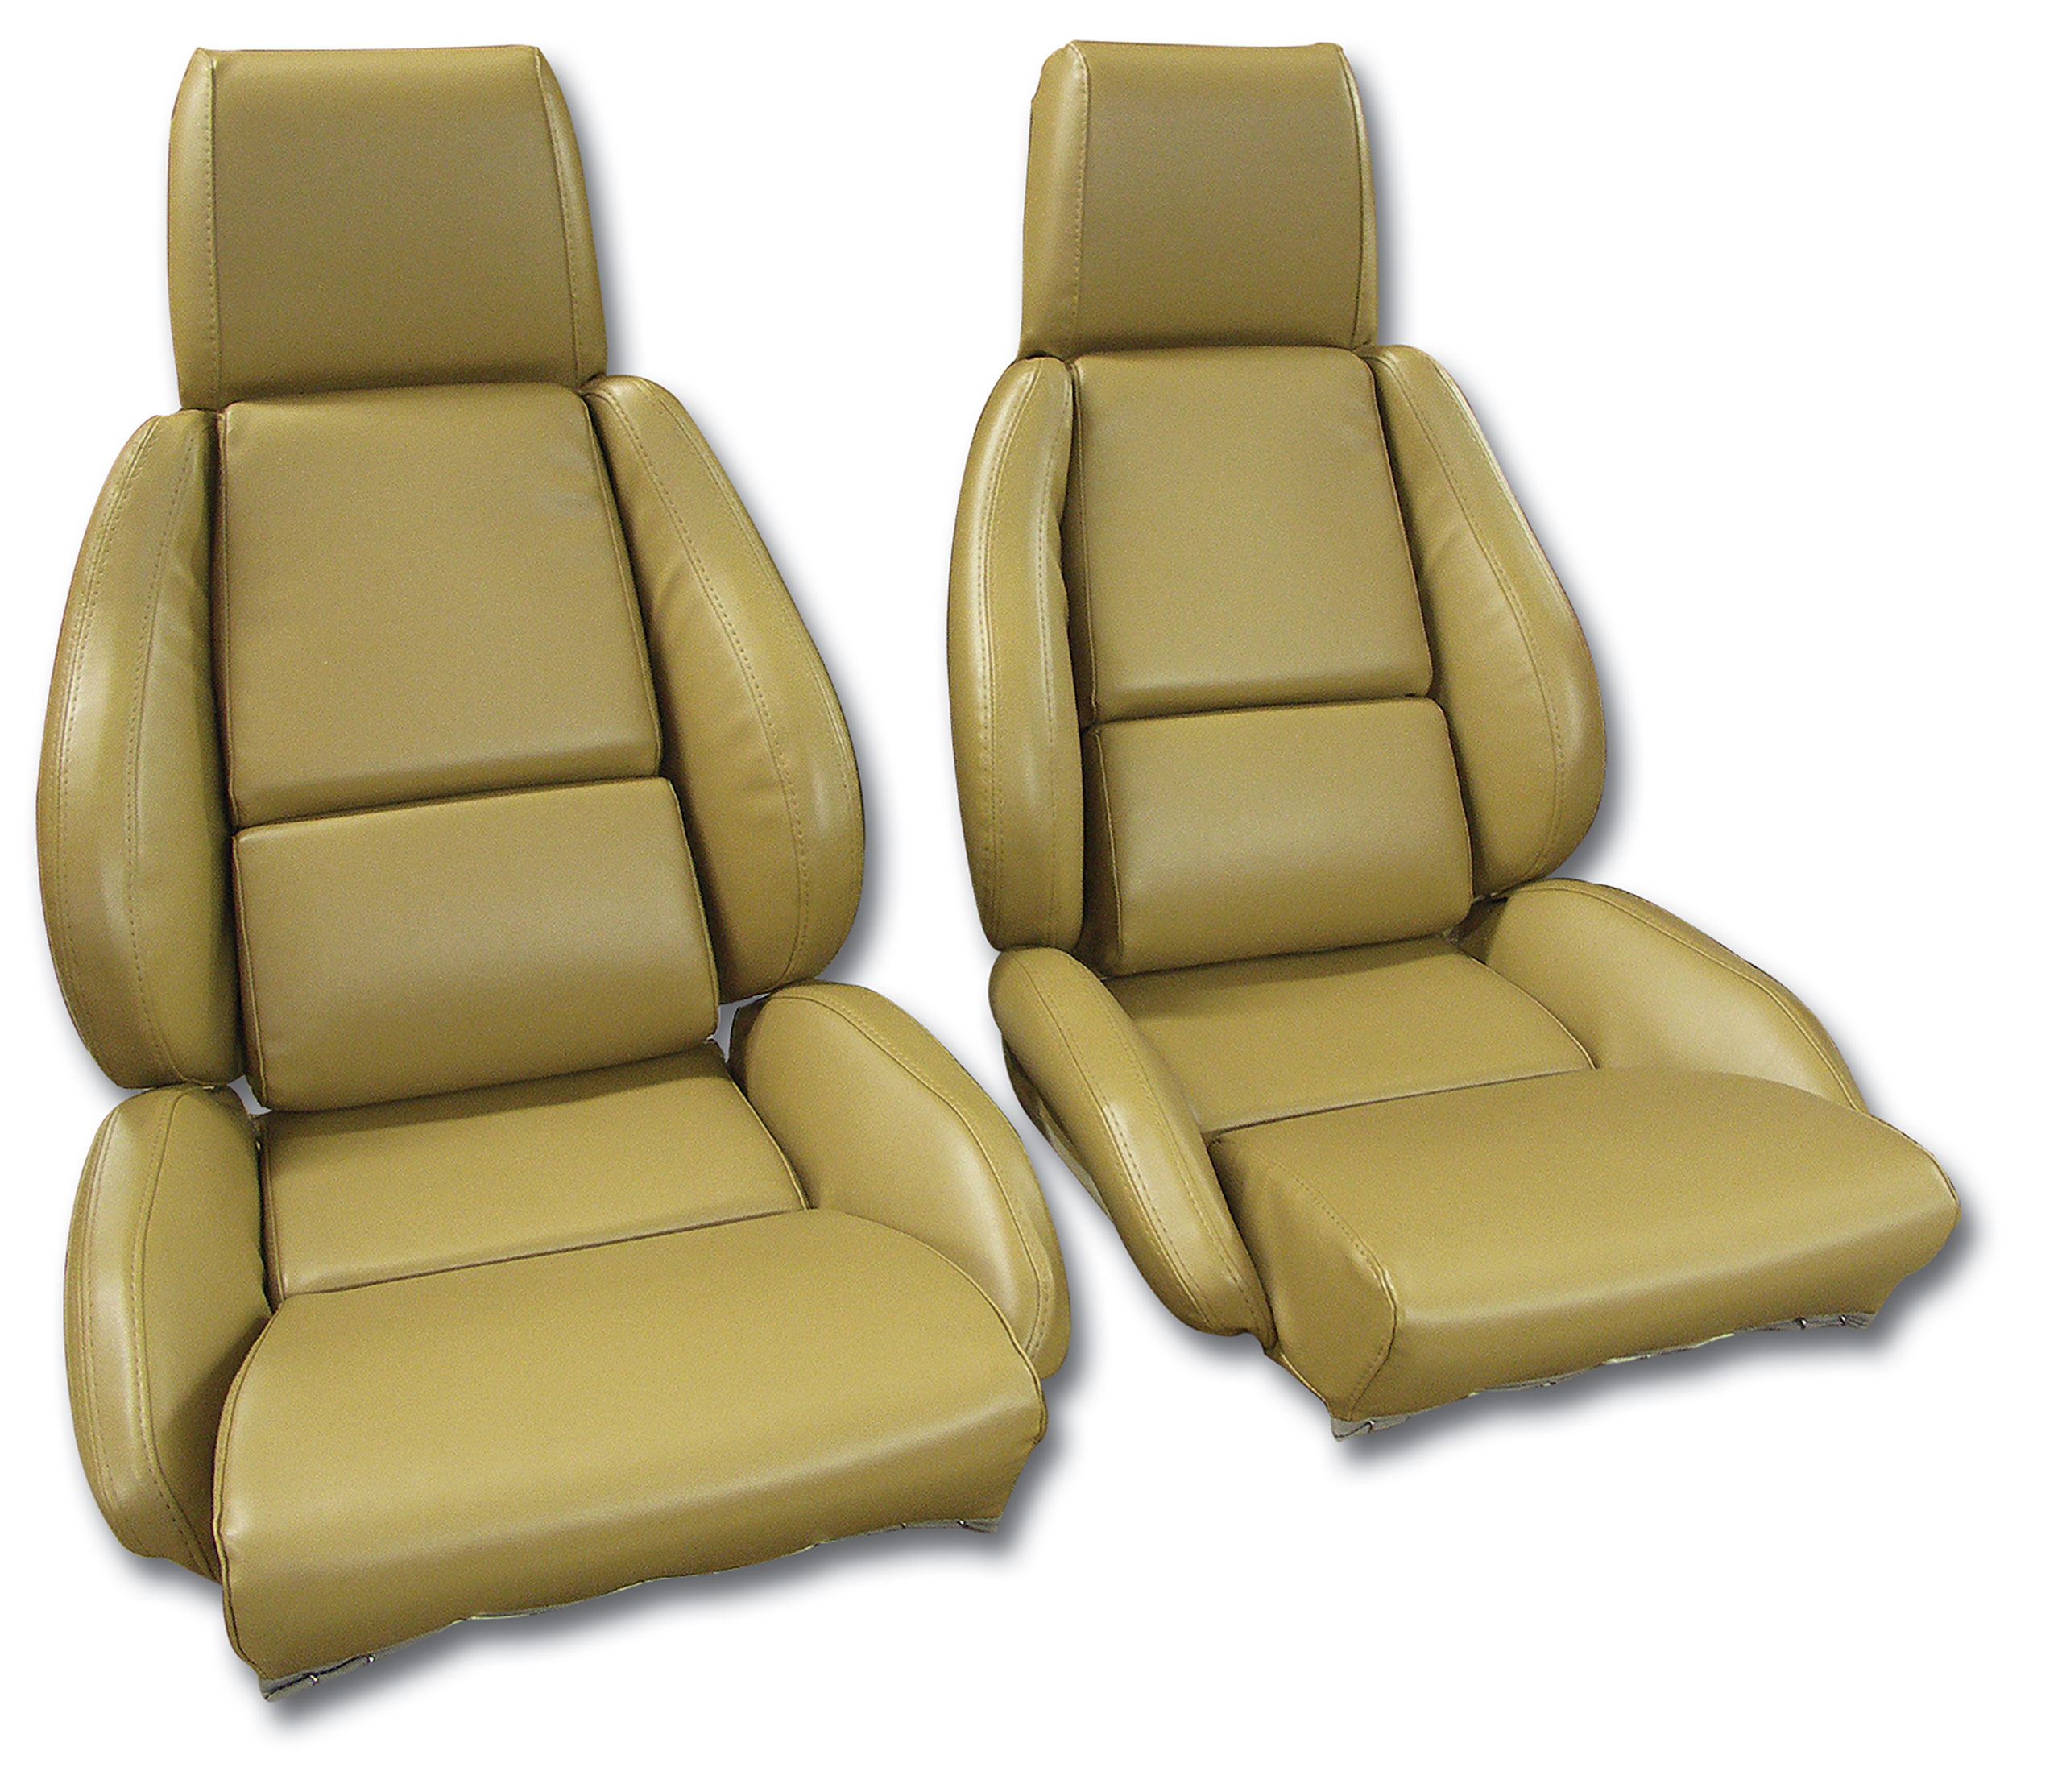 84-87 Corvette C4 468472 OE Style 100% Leather Standard Seat Covers W/O Perforated Inserts Saddle CA-468772 